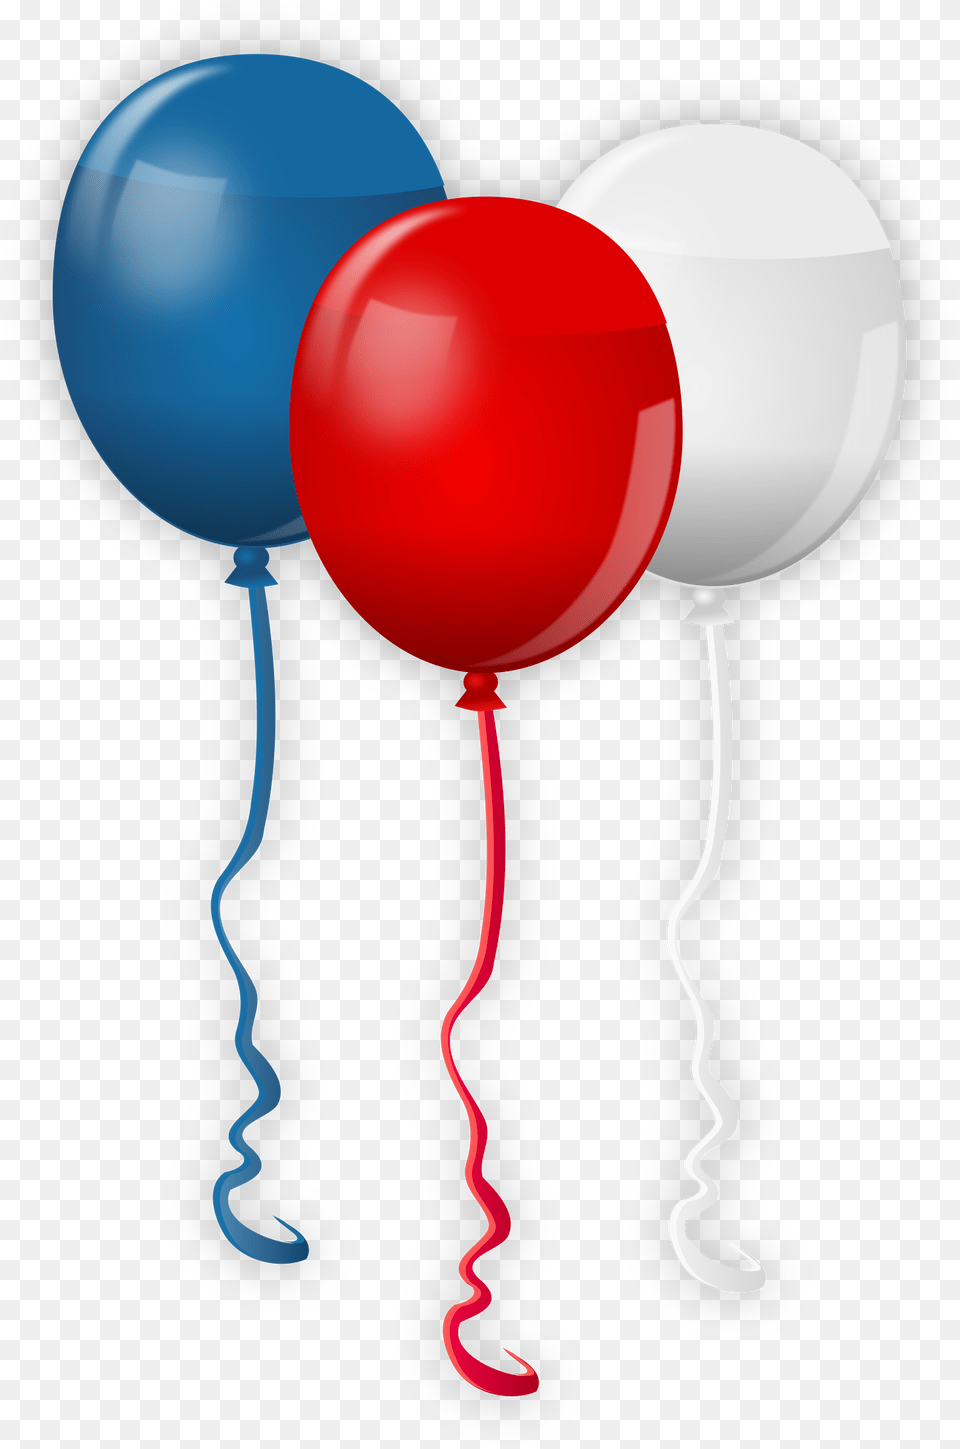 Chevron Arrow Clipart No School Monday Labor Day Red And Blue Balloons, Balloon Png